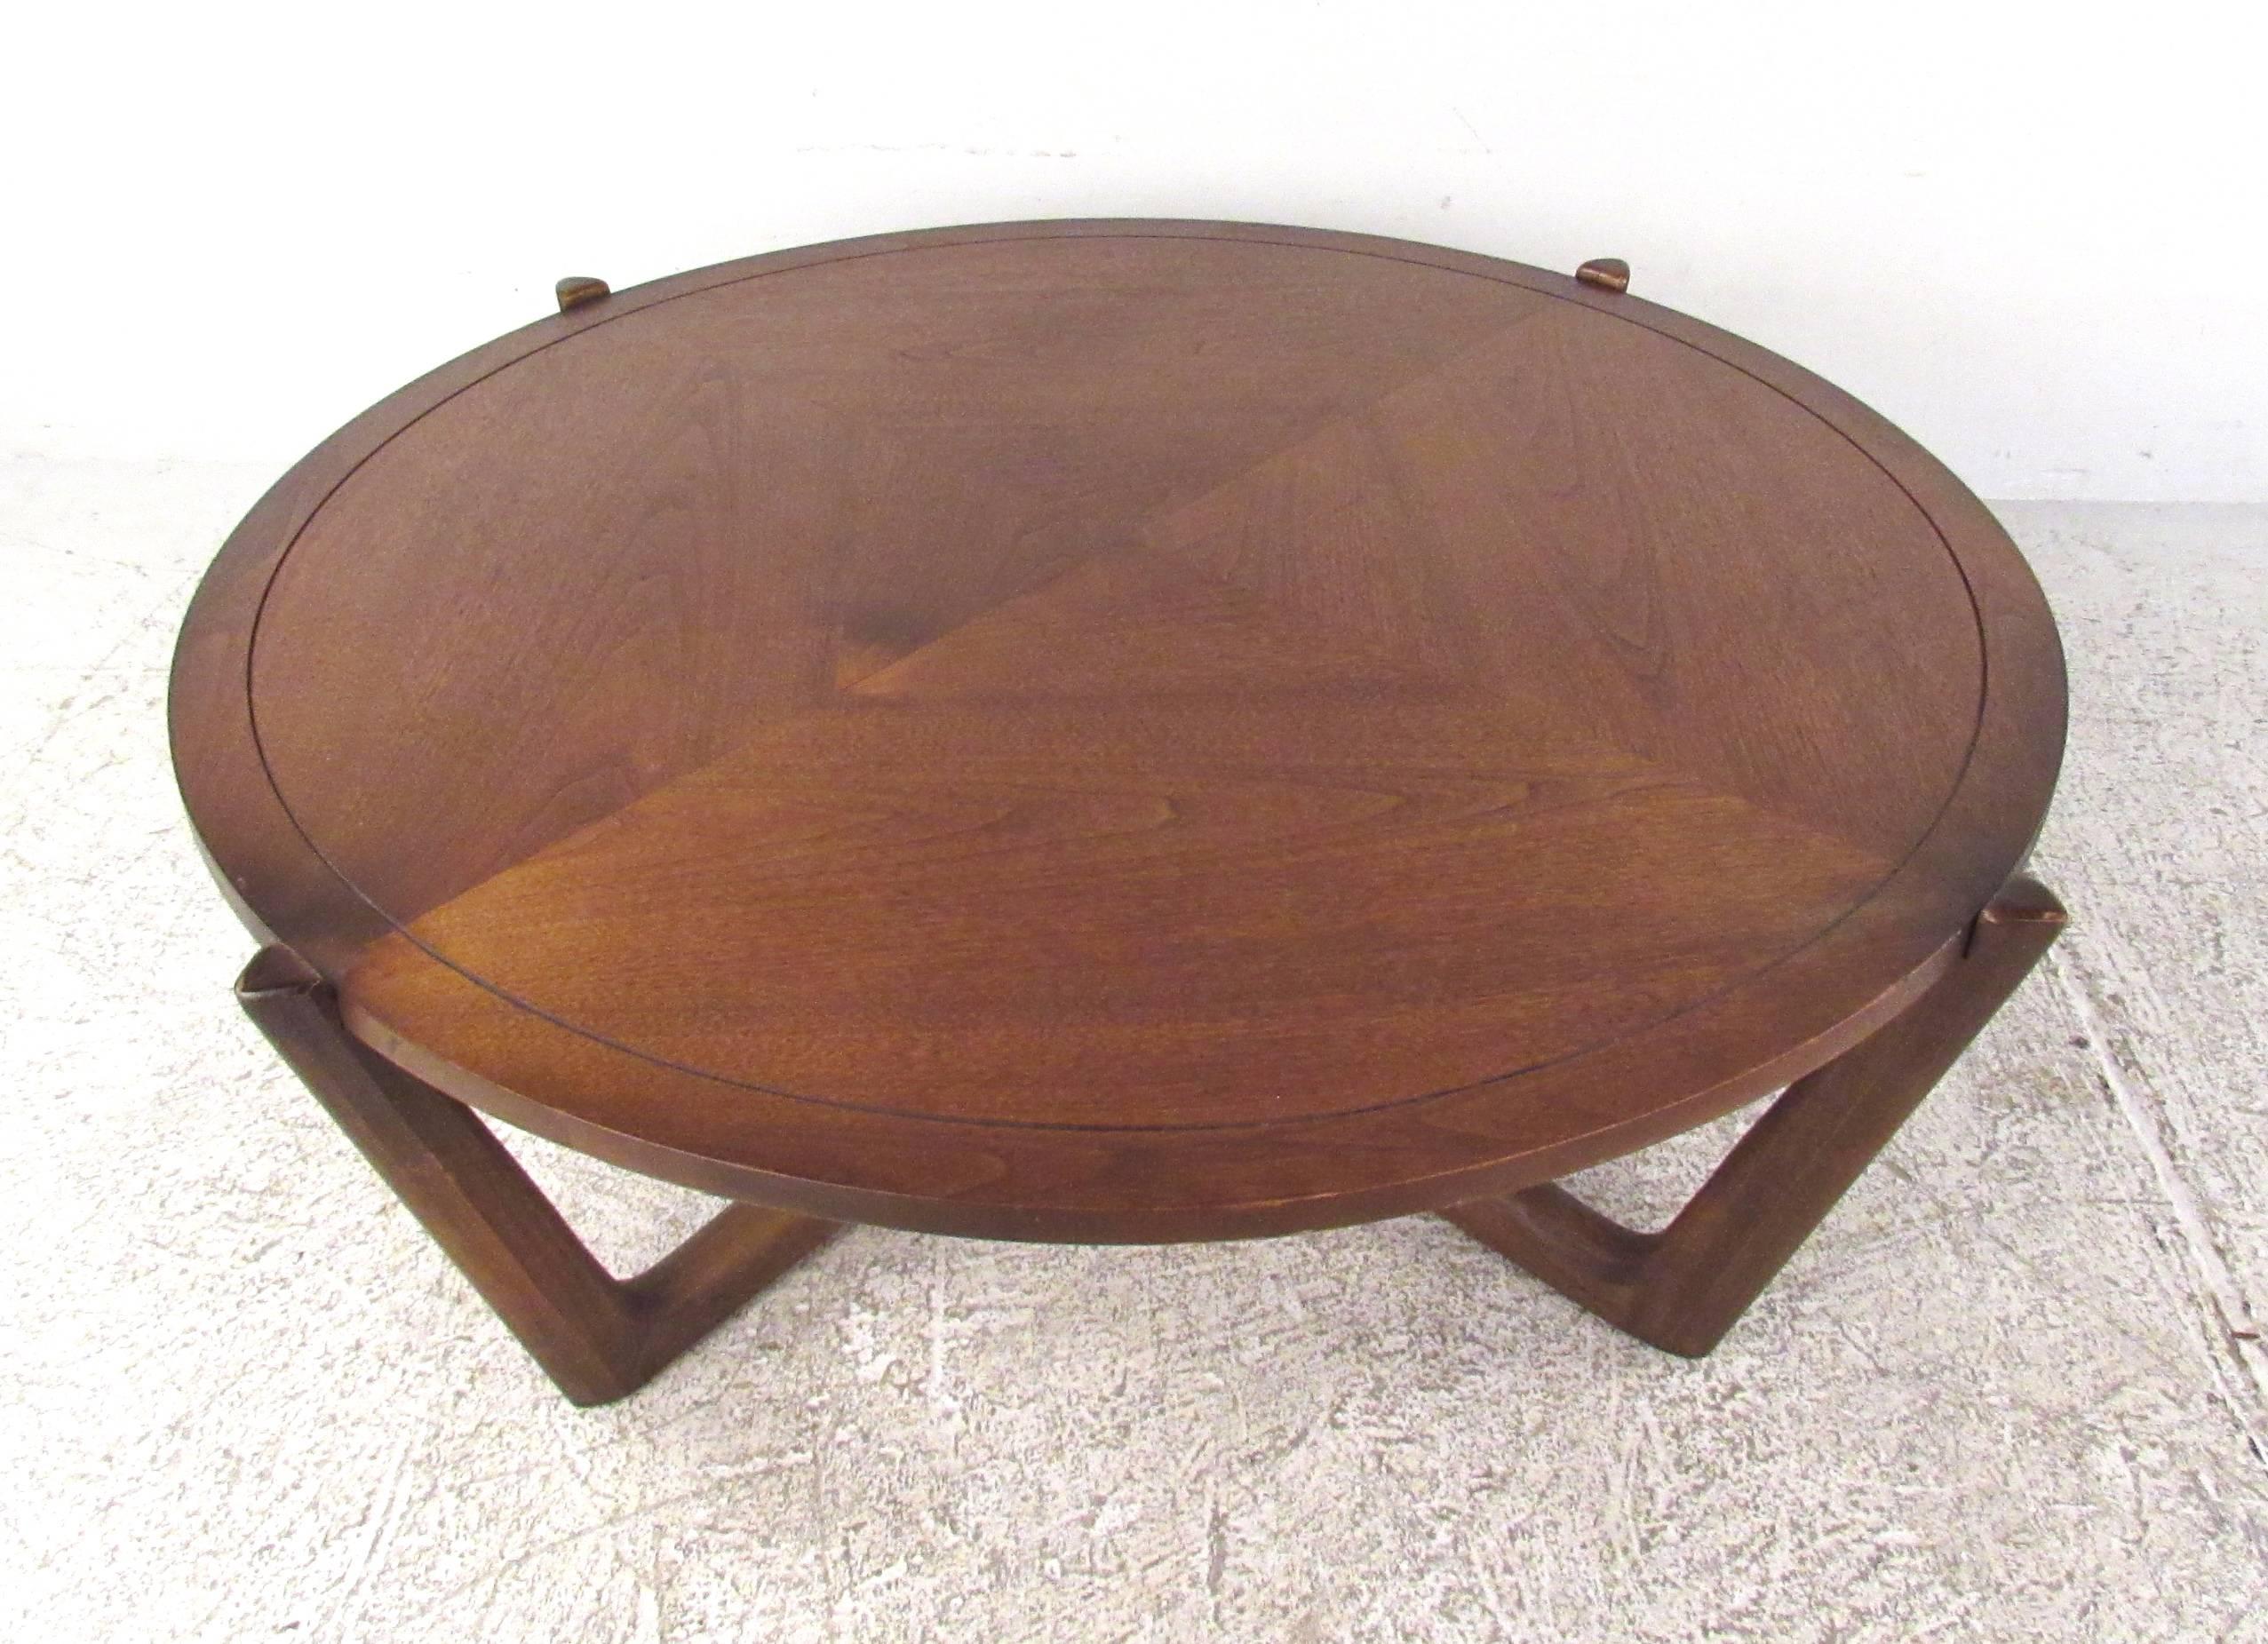 This circular vintage coffee table features a uniquely designed base with sculpted frame. Large natural finish tabletop makes a stunning Mid-Century addition to any interior setting. Please confirm item location (NY or NJ).